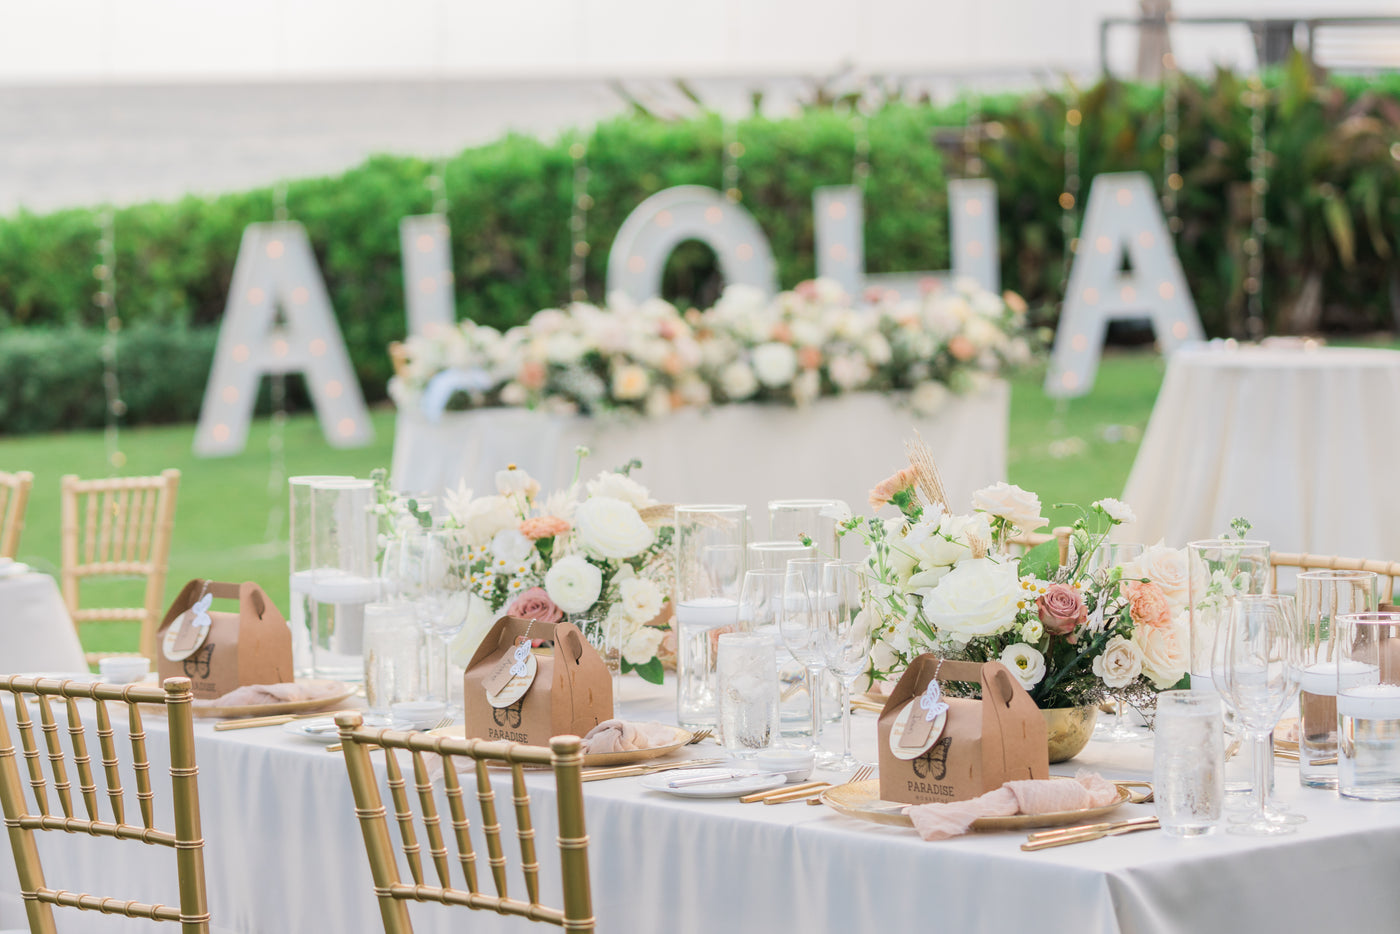 Outdoor ocean front wedding with chrsyalis box at each seat as wedding favor in front of a Aloha sign in Ko Olina, Kapolei, Hawaii